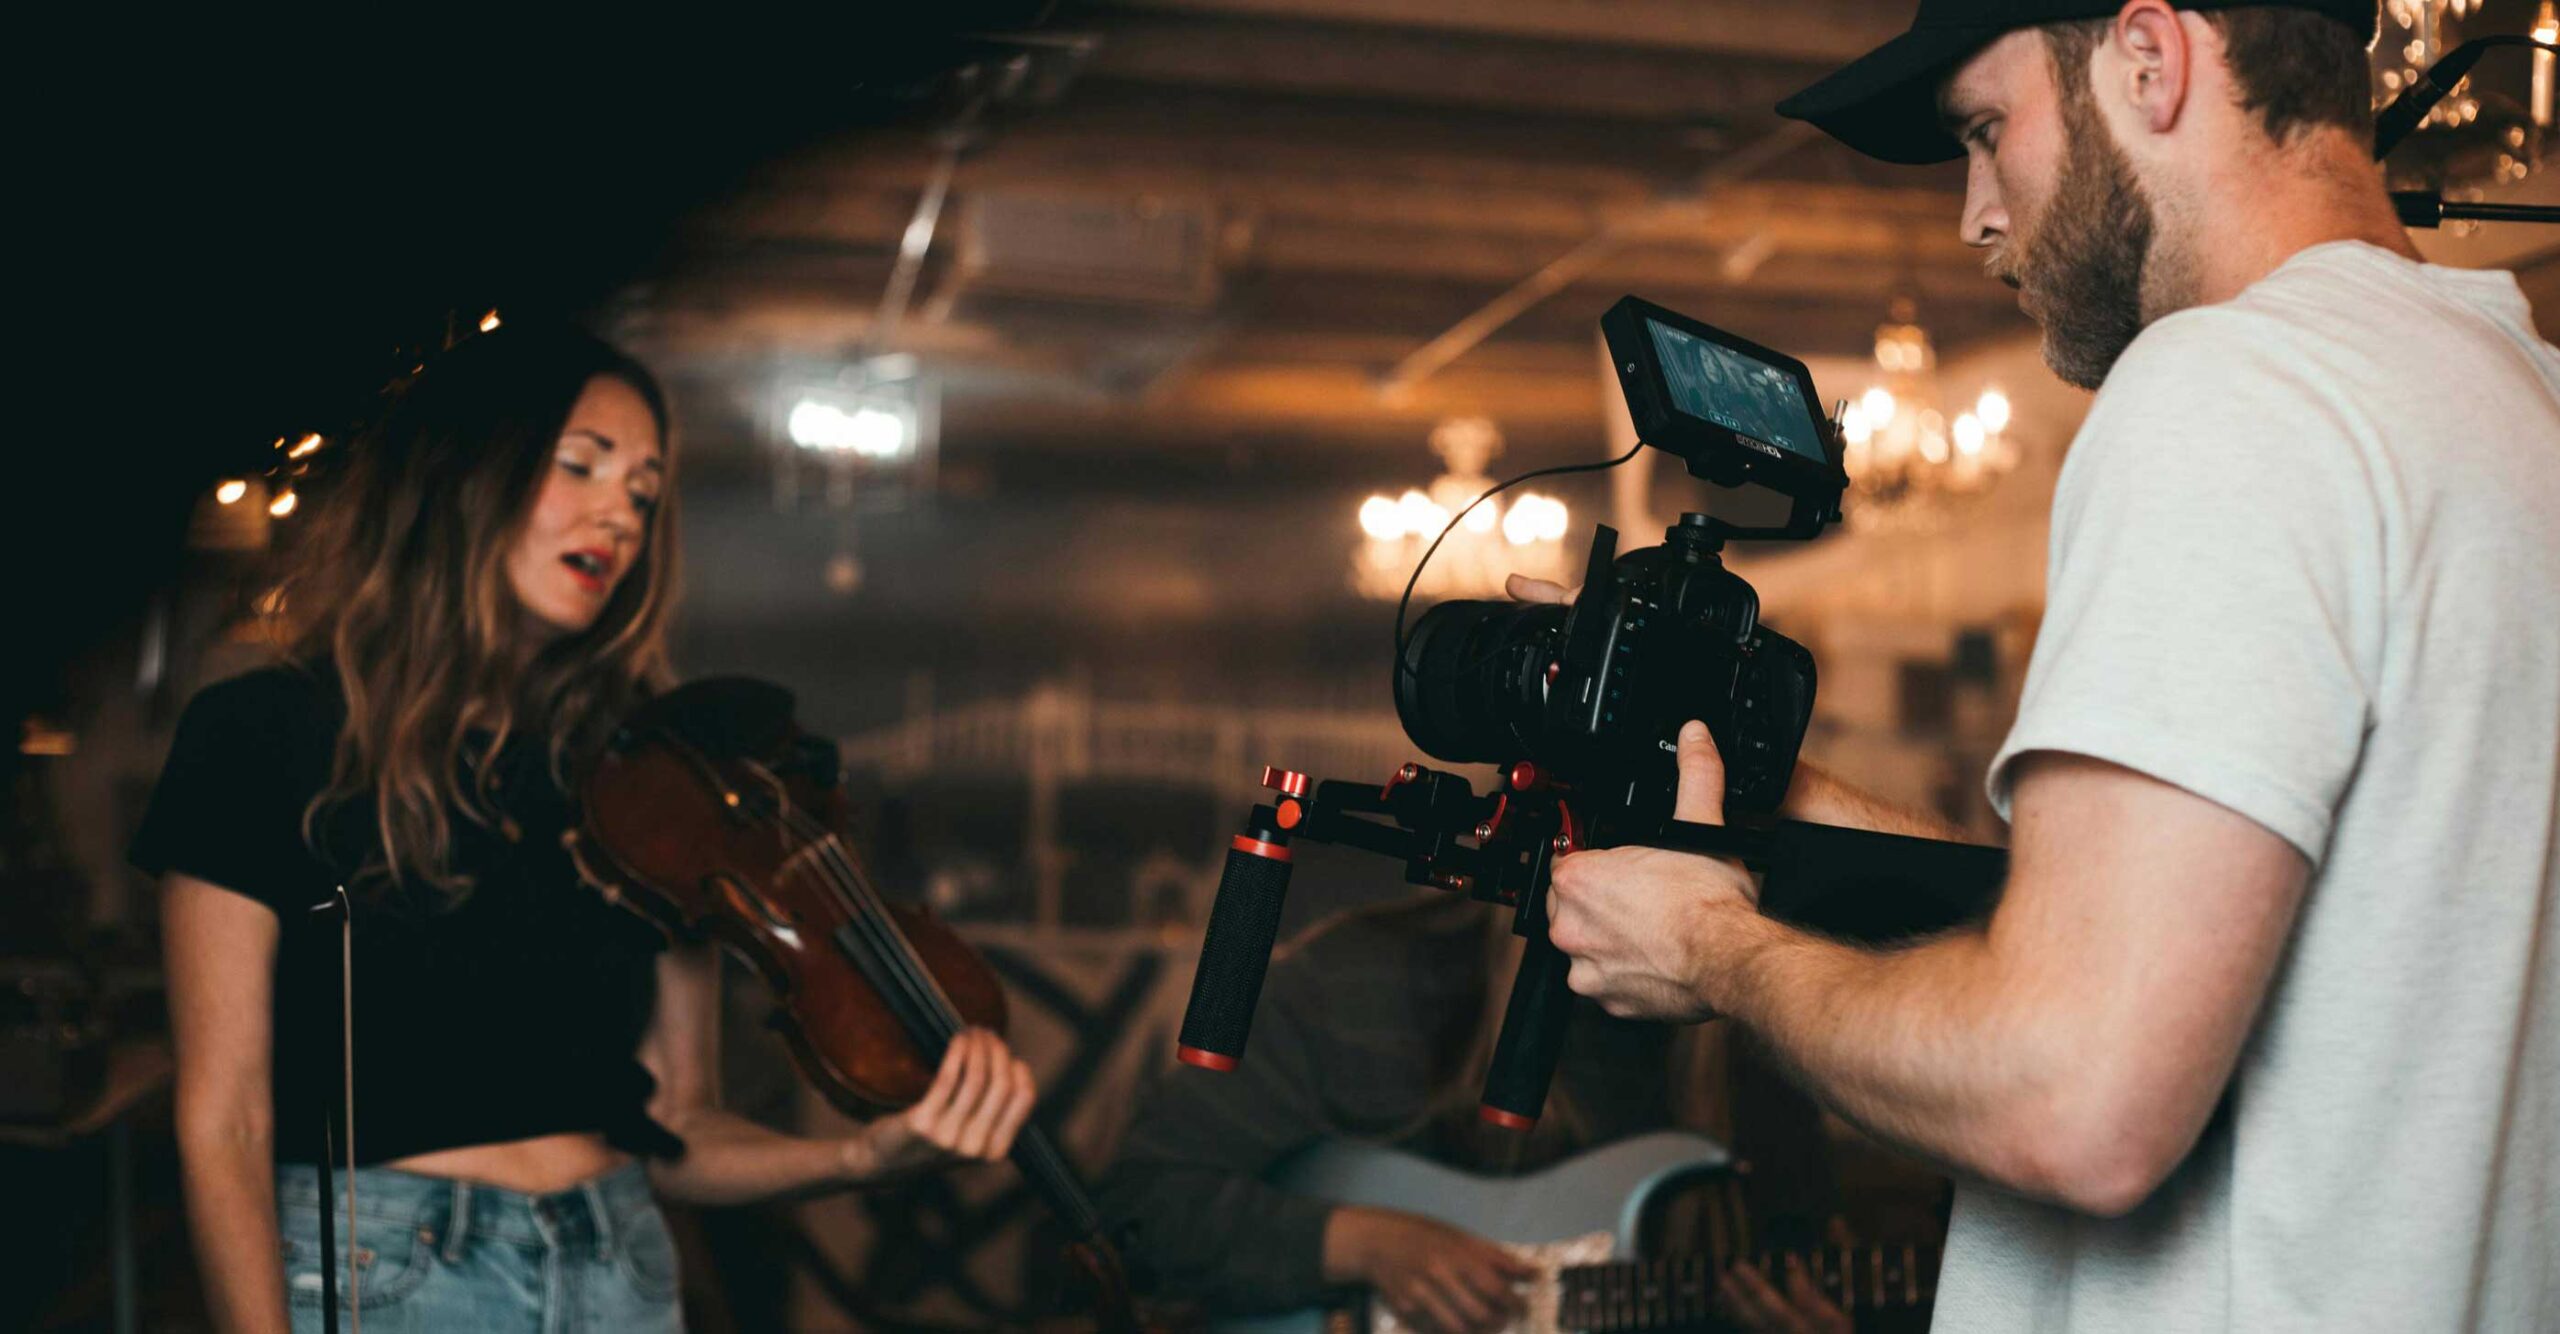 A violinist sings while being filmed by a videographer holding a camera.